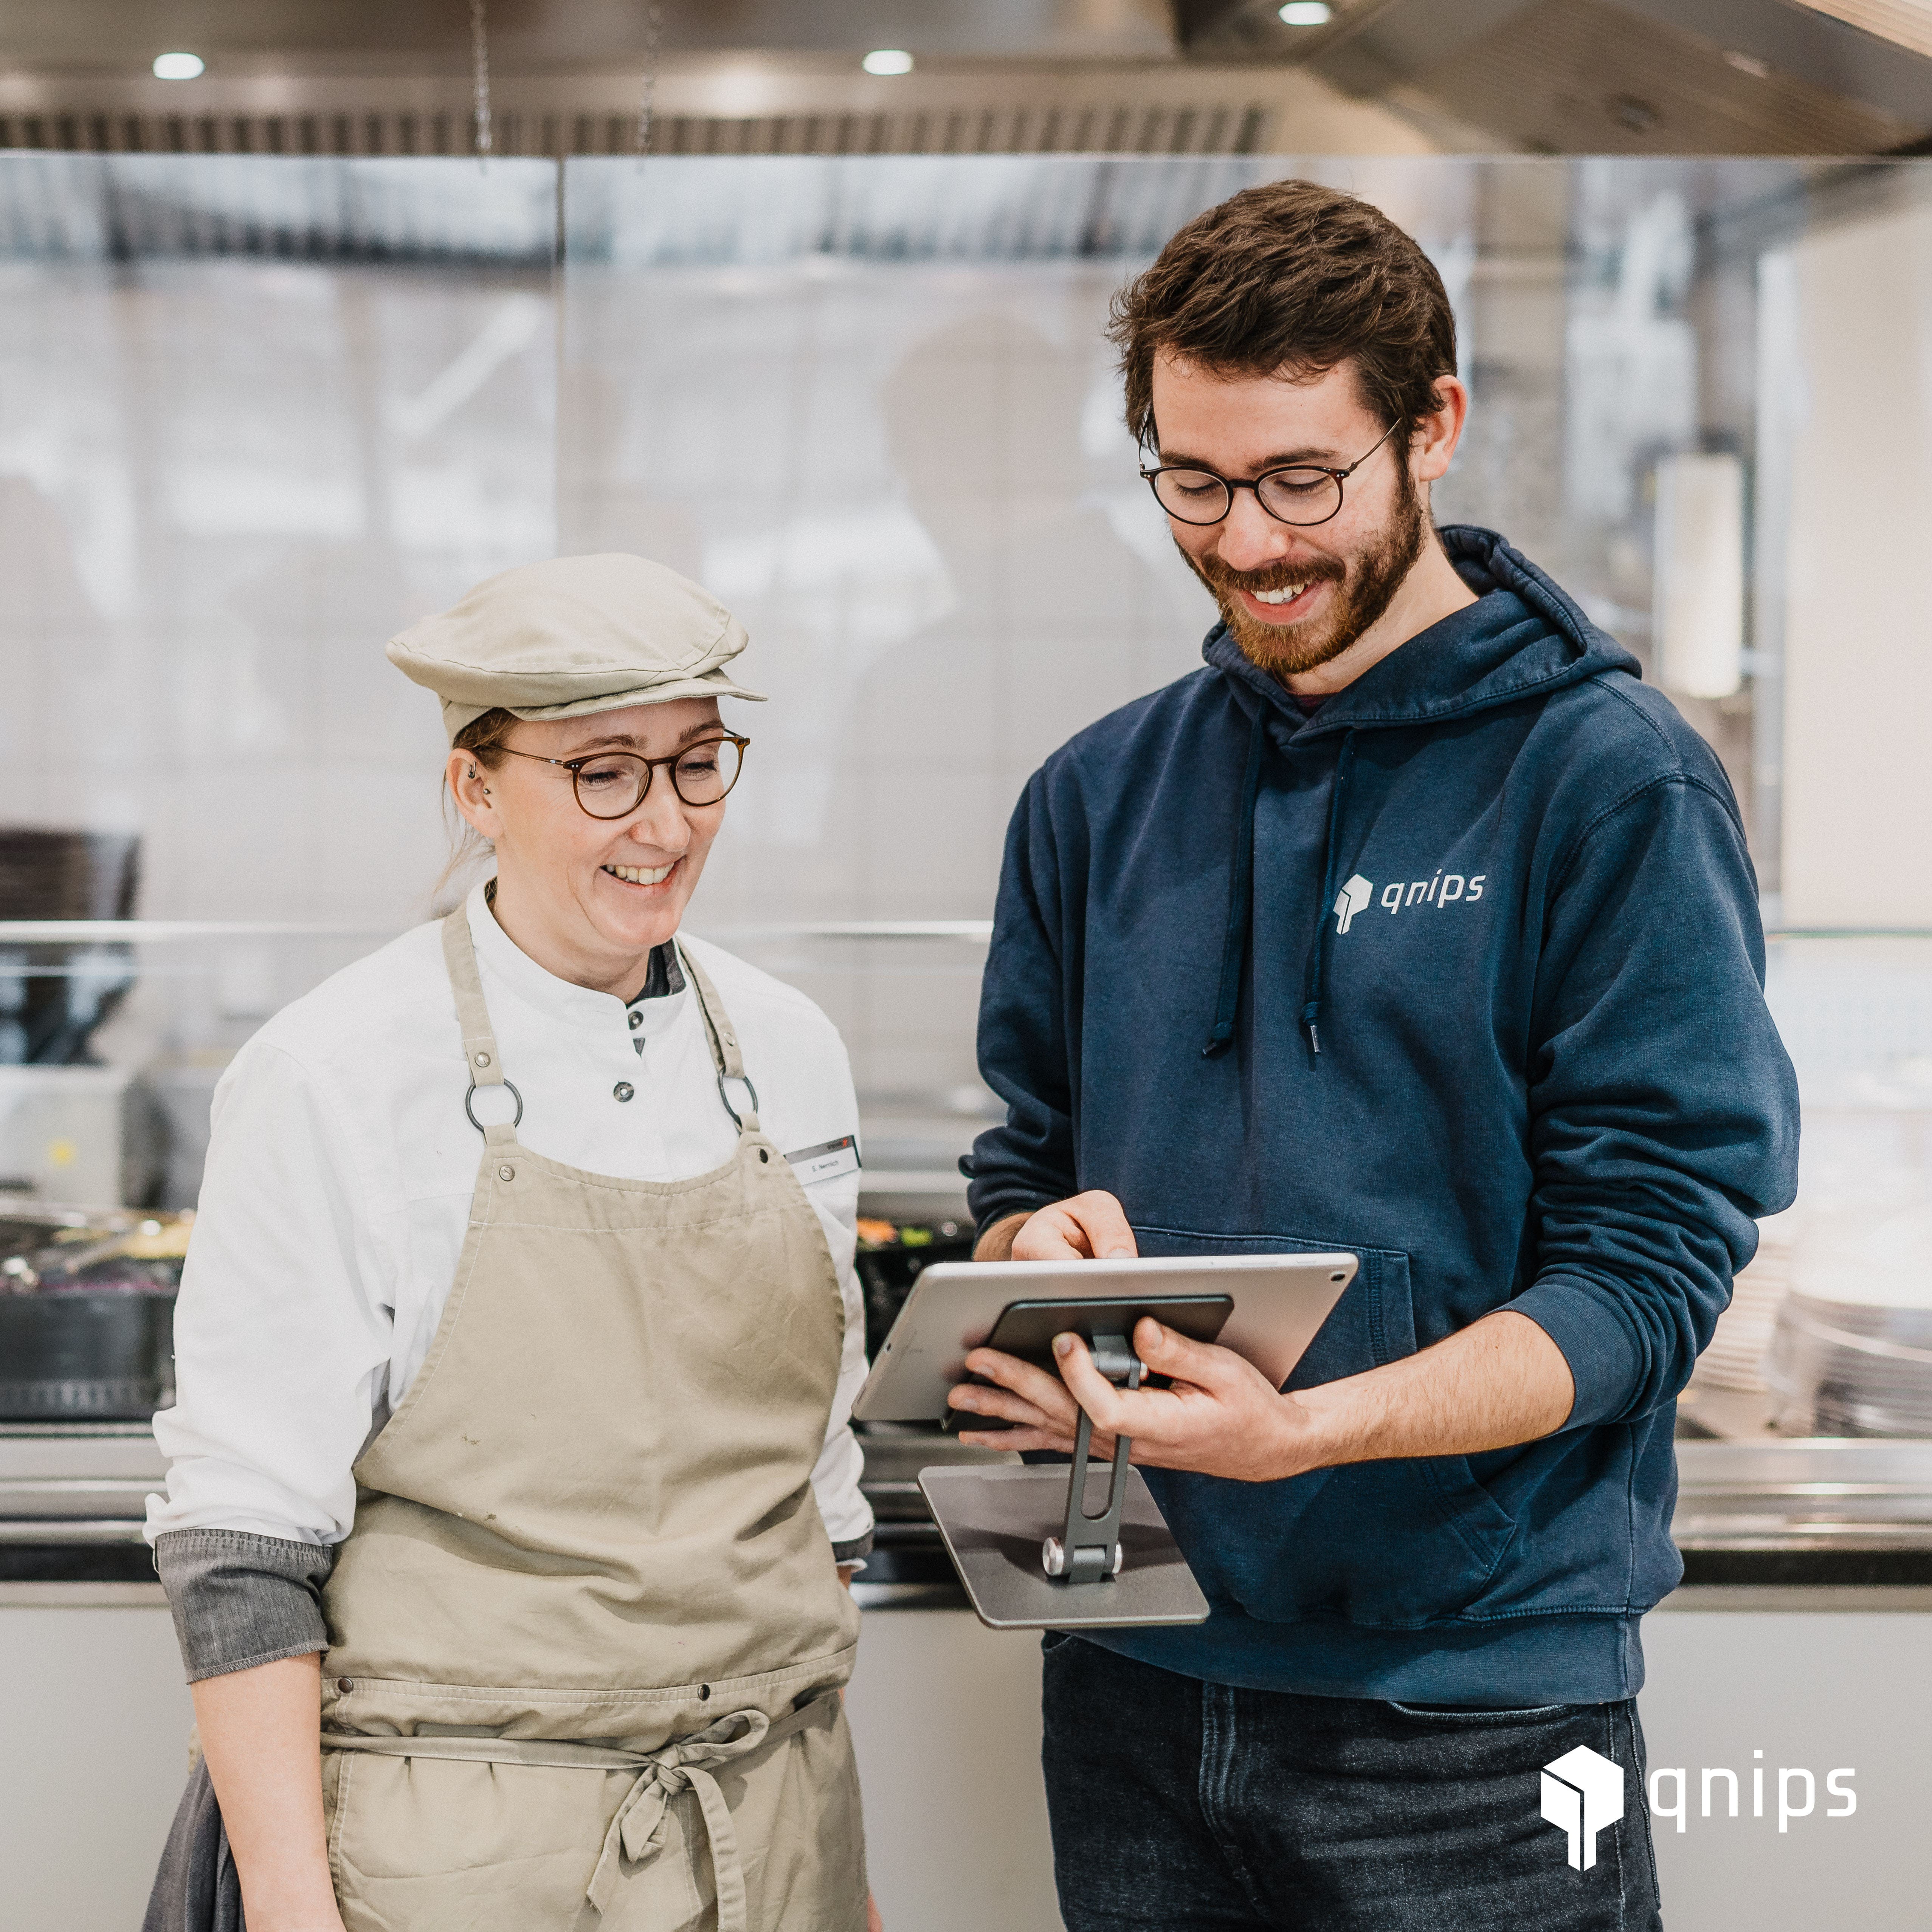 qnips supports you with the digitization of your contract catering!